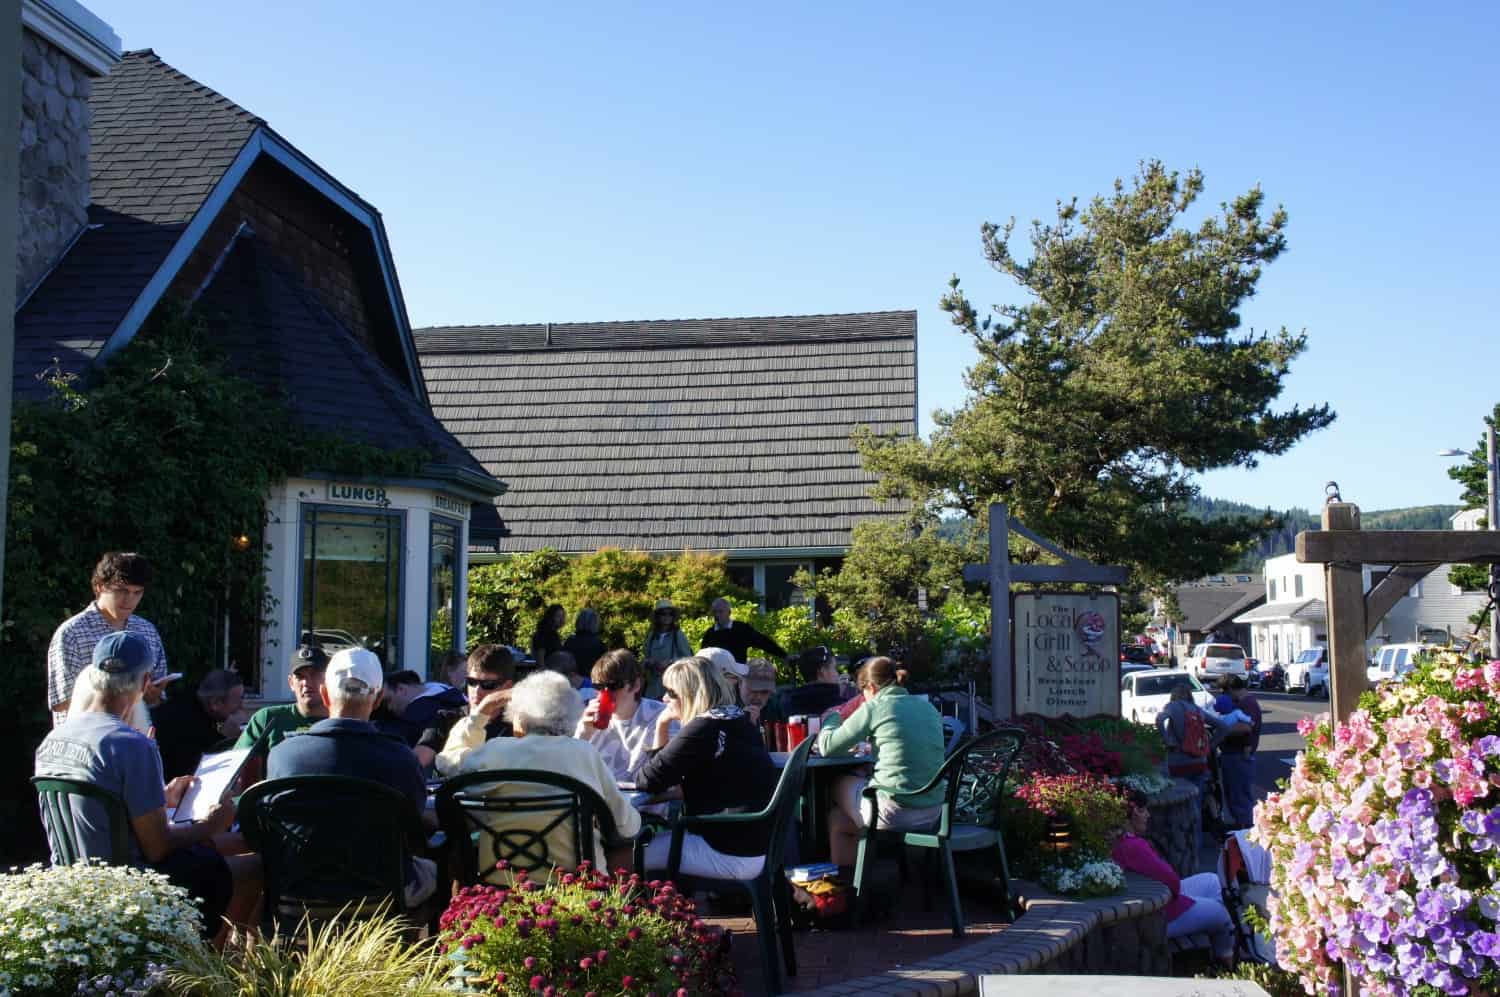 The Local Grill and Scoop - Cannon Beach, Oregon